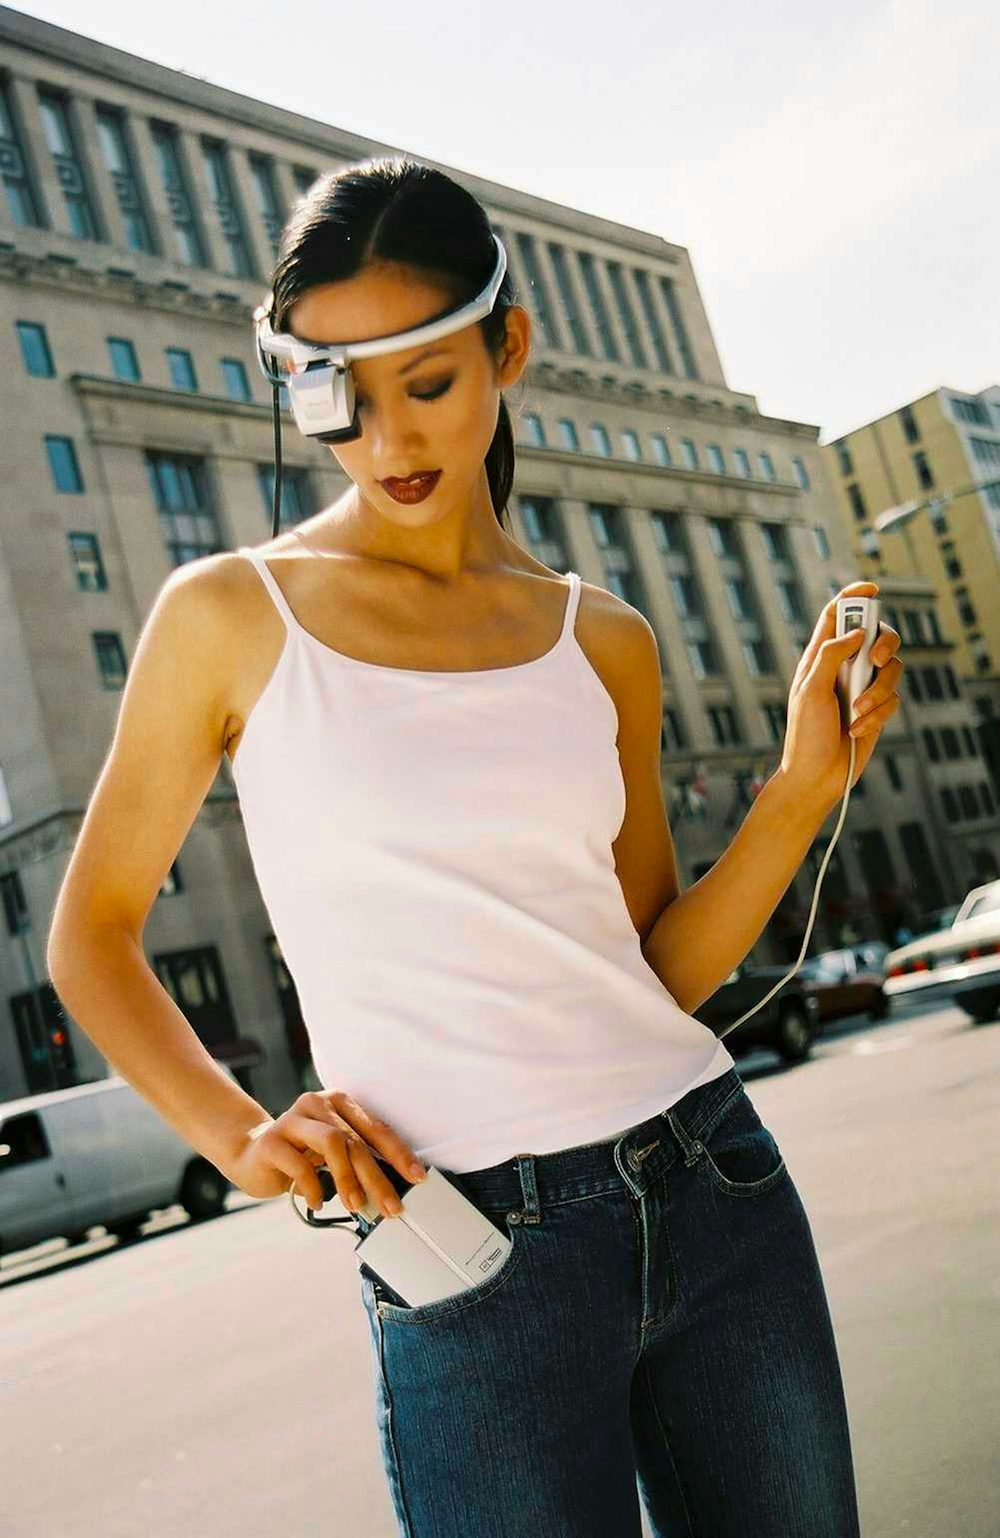 A model wearing a 2002 version of the Mobile Assistant, the POMA